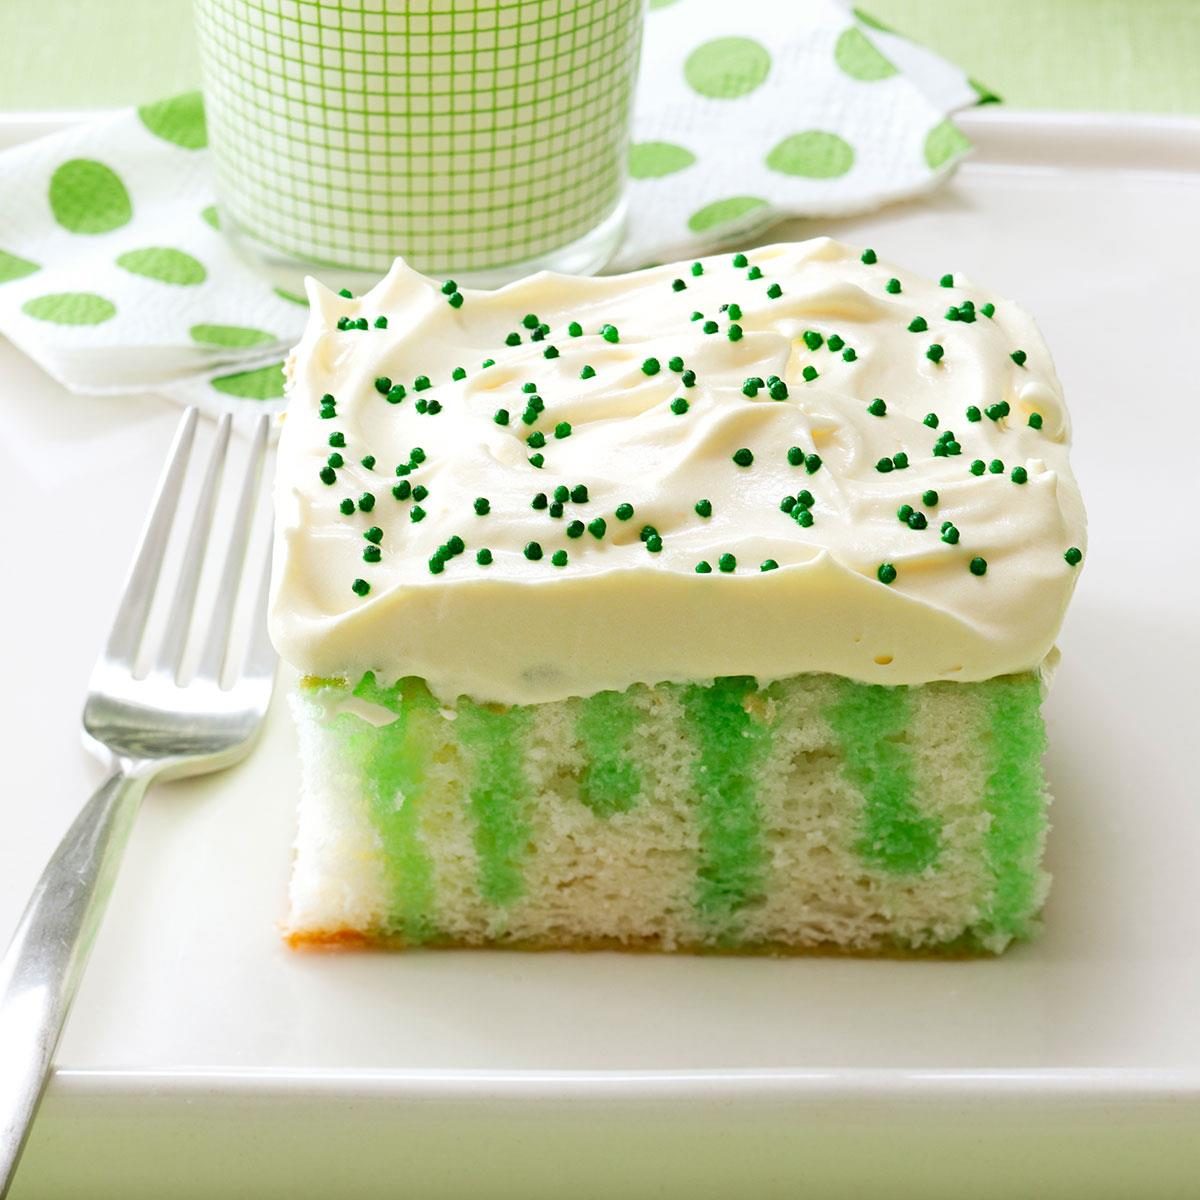 <p>You're in luck if your birthday is in March: You get to celebrate with this tender poke cake! It's flavored and striped with lime, and finished with a rich vanilla topping (and candles, of course).</p> <div class="listicle-page__buttons"> <div class="listicle-page__cta-button"><a href='https://www.tasteofhome.com/recipes/wearing-o-green-cake/'>Get the Wearing O' Green Cake Recipe</a></div> </div>